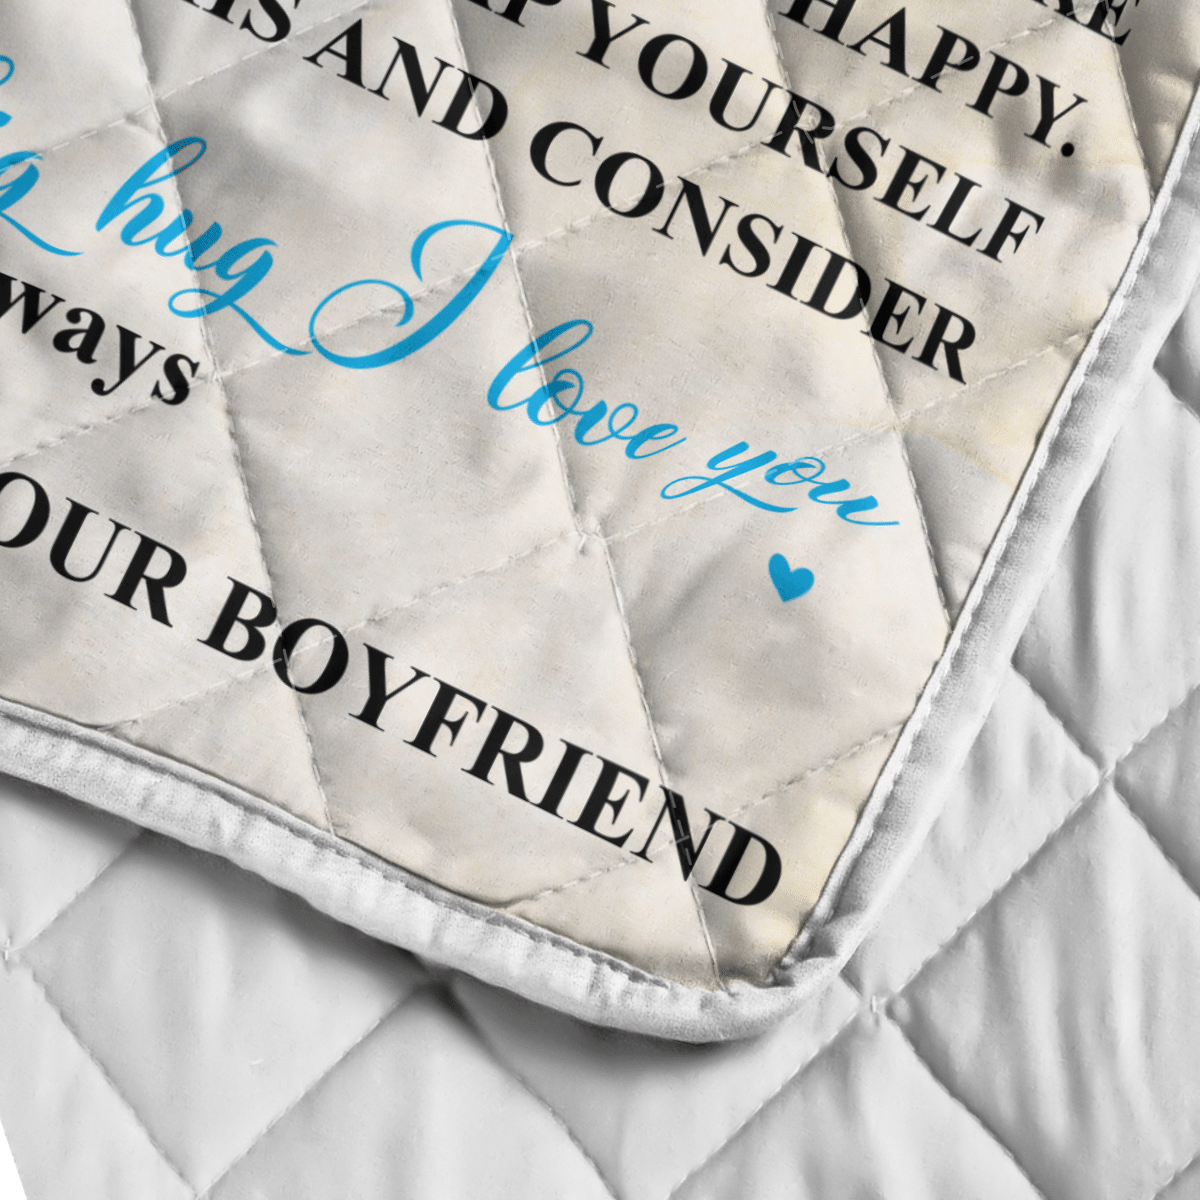 To My Girlfriend I Love You To The Moon And Back Fleece Blanket - Quilt